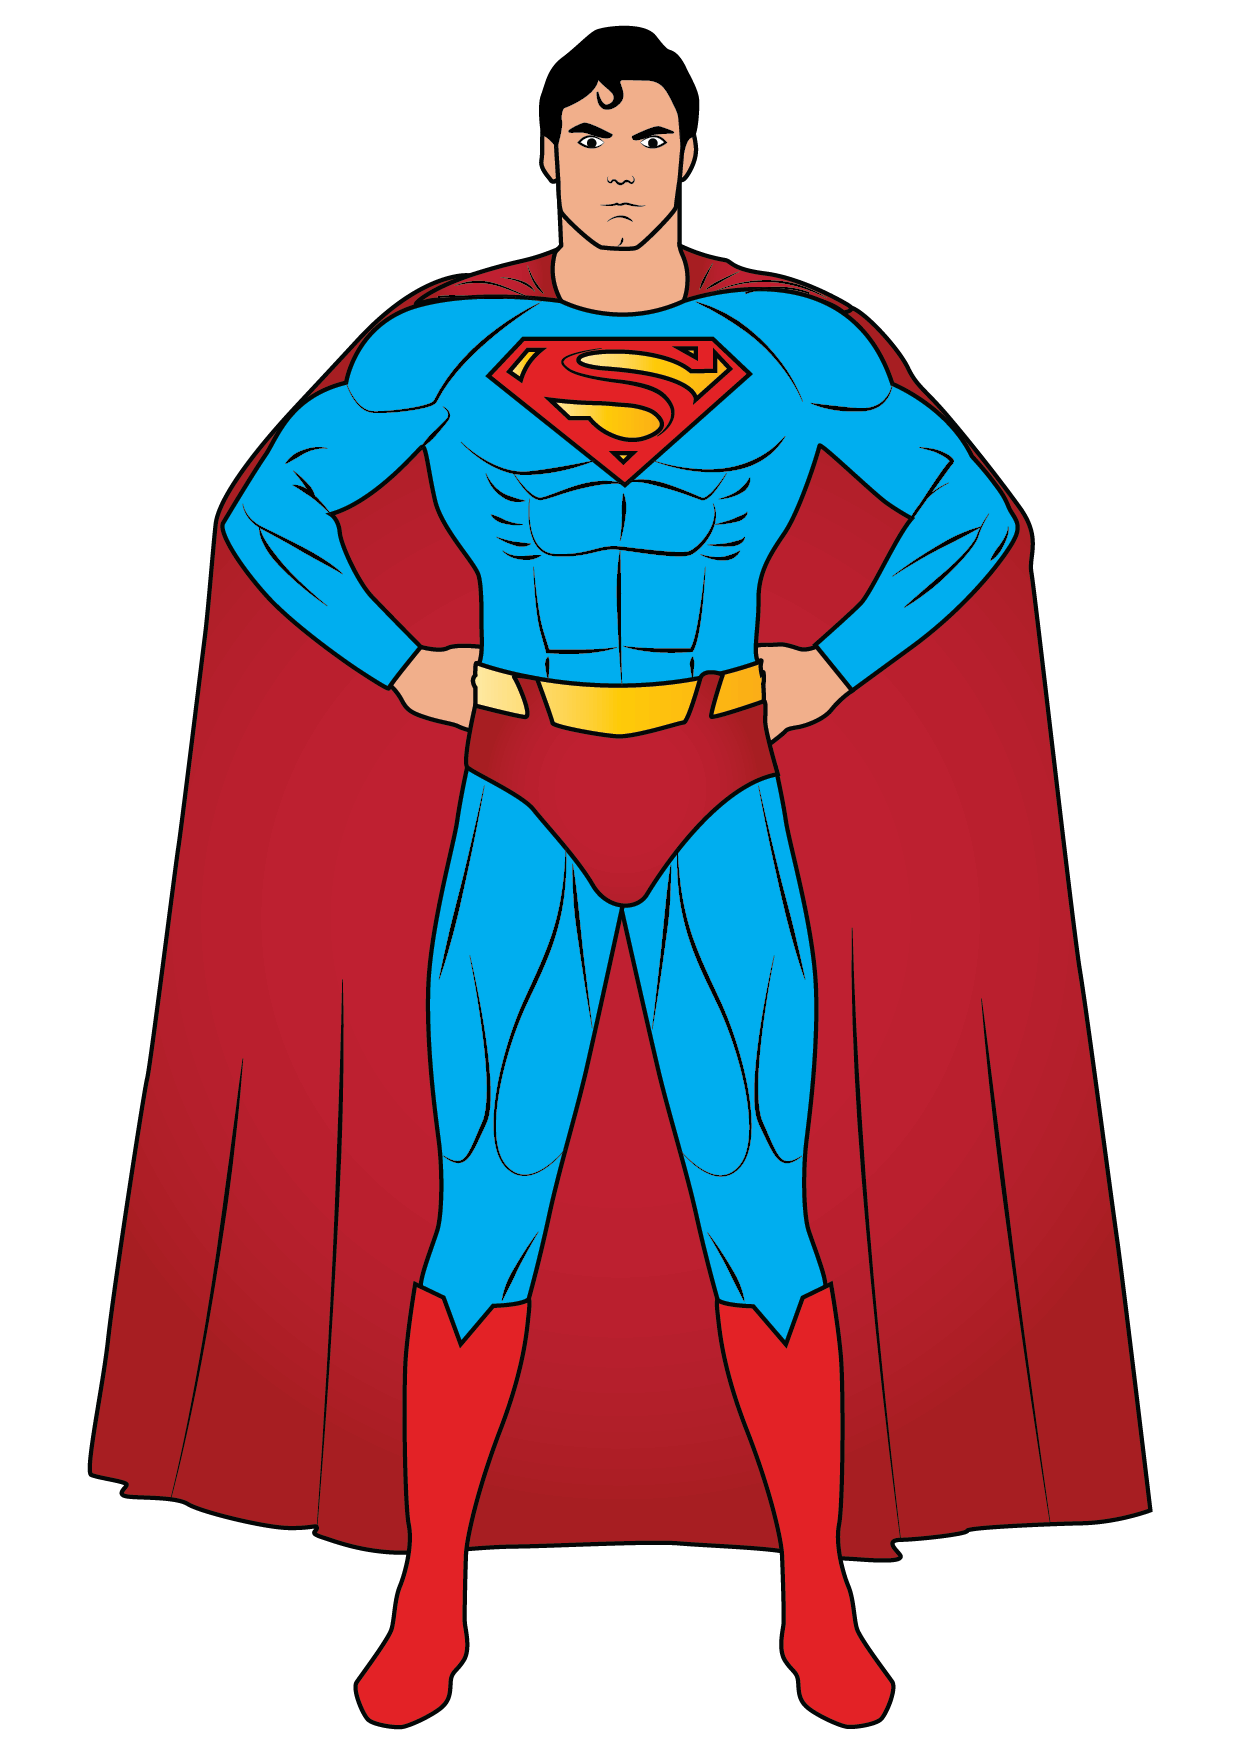 How to Draw Superman Step by Step Printable